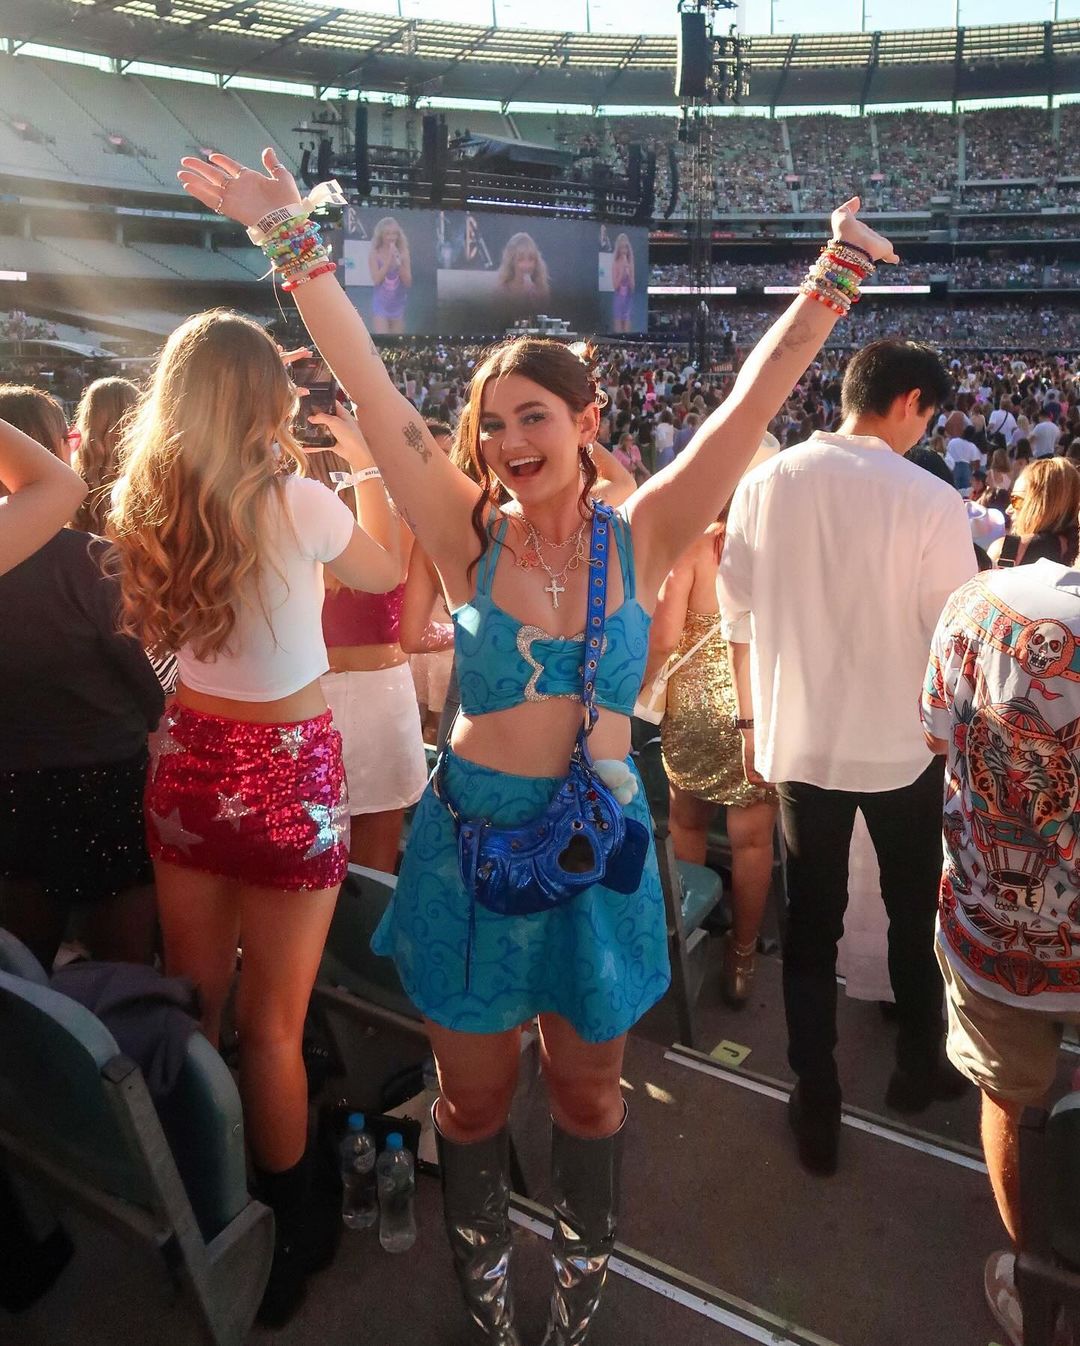 A young women in a cute blue outfit smiles and throws her hands in the air in the stadium.